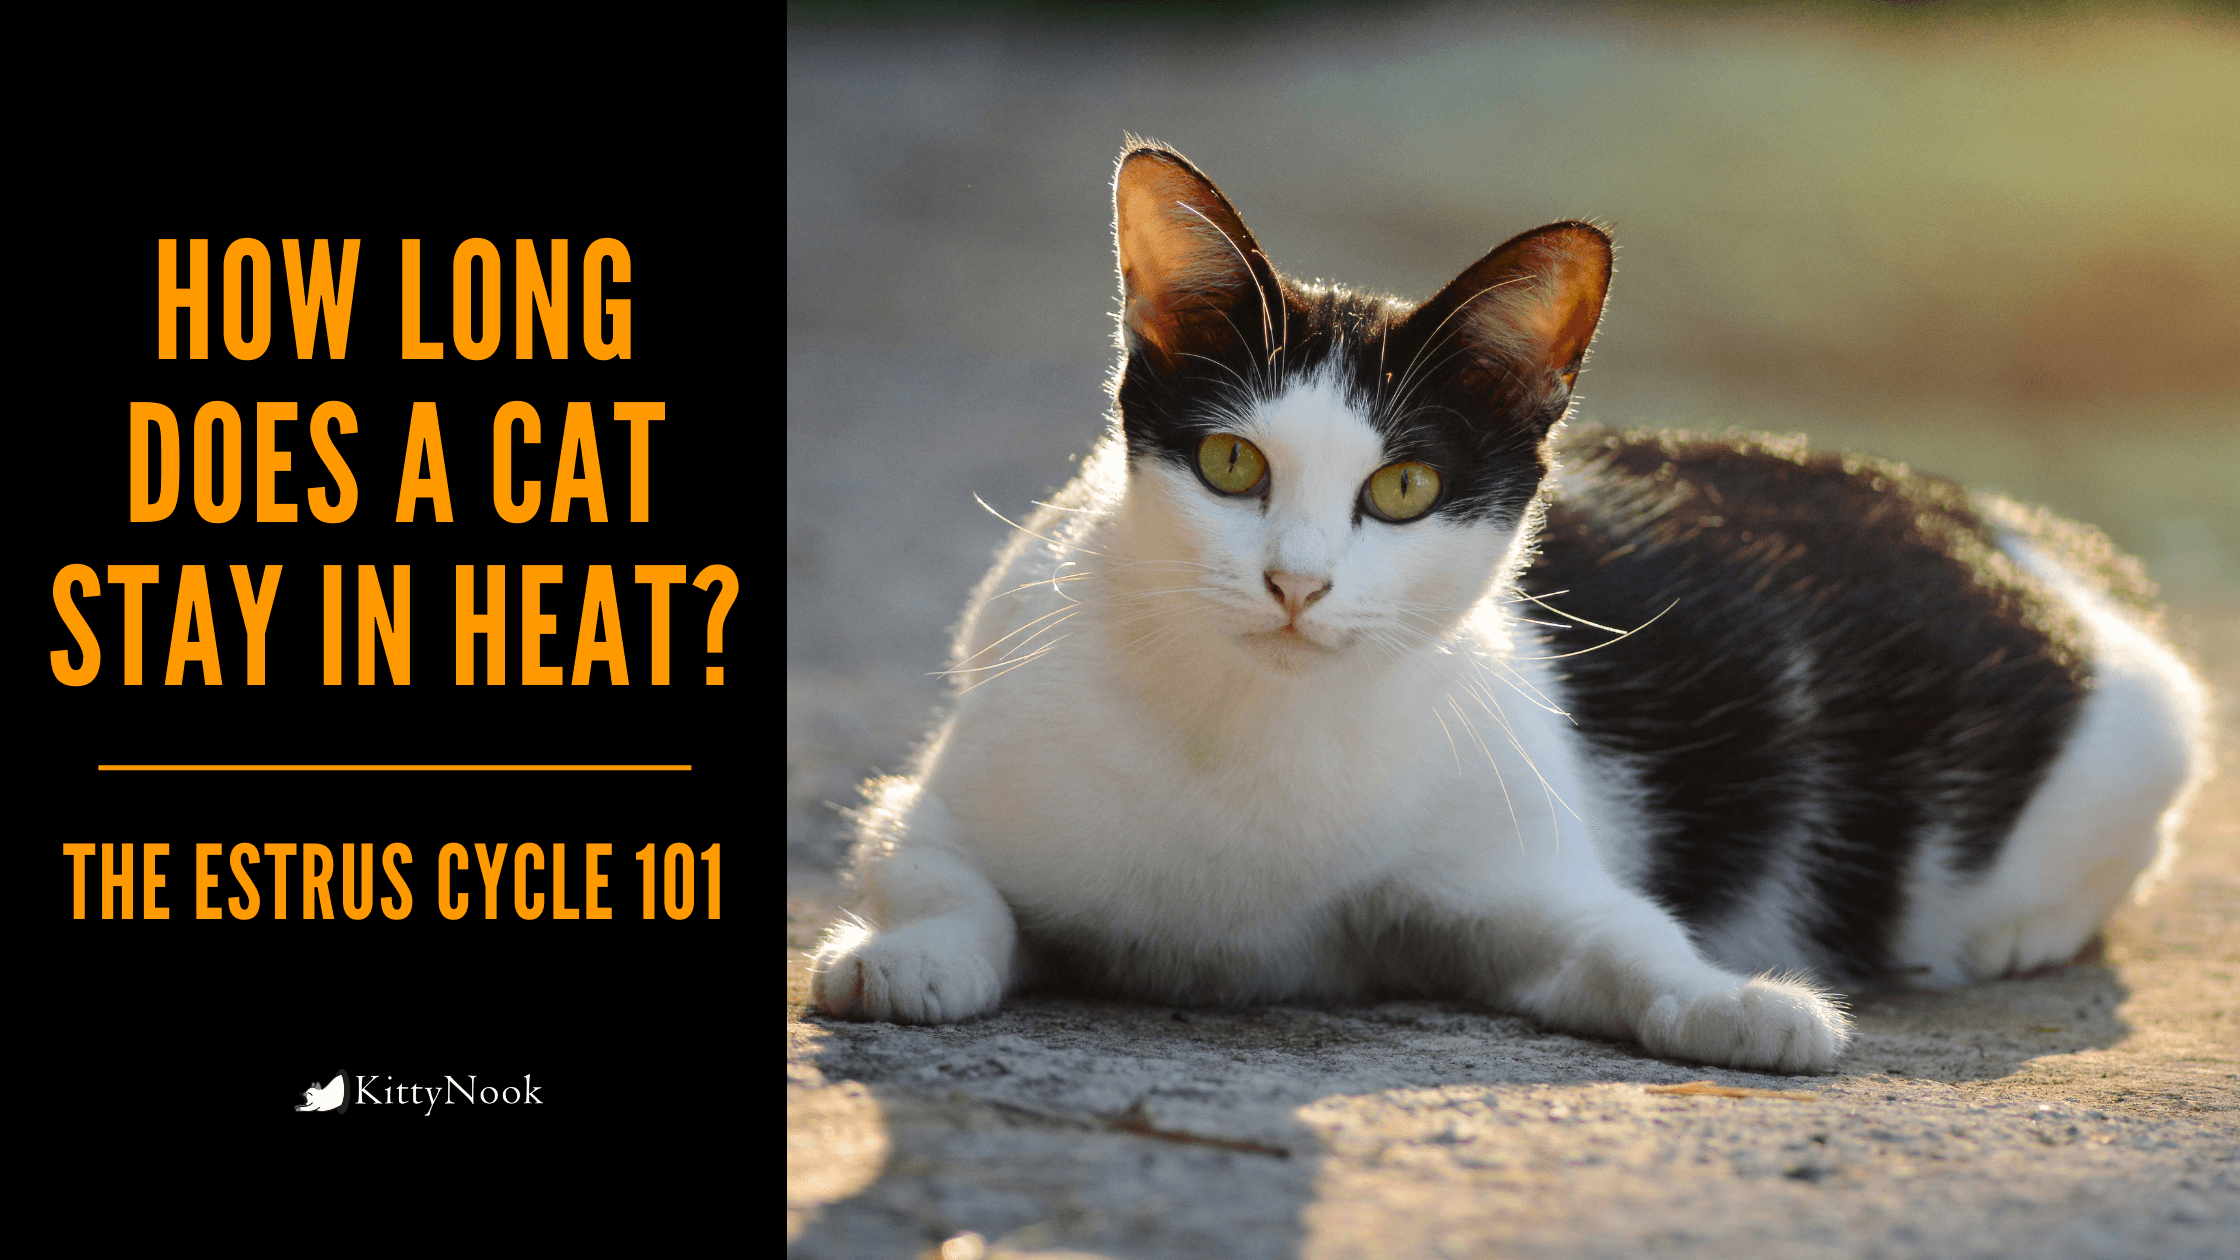 How Long Does a Cat Stay in Heat? | The Estrus Cycle 101 - KittyNook